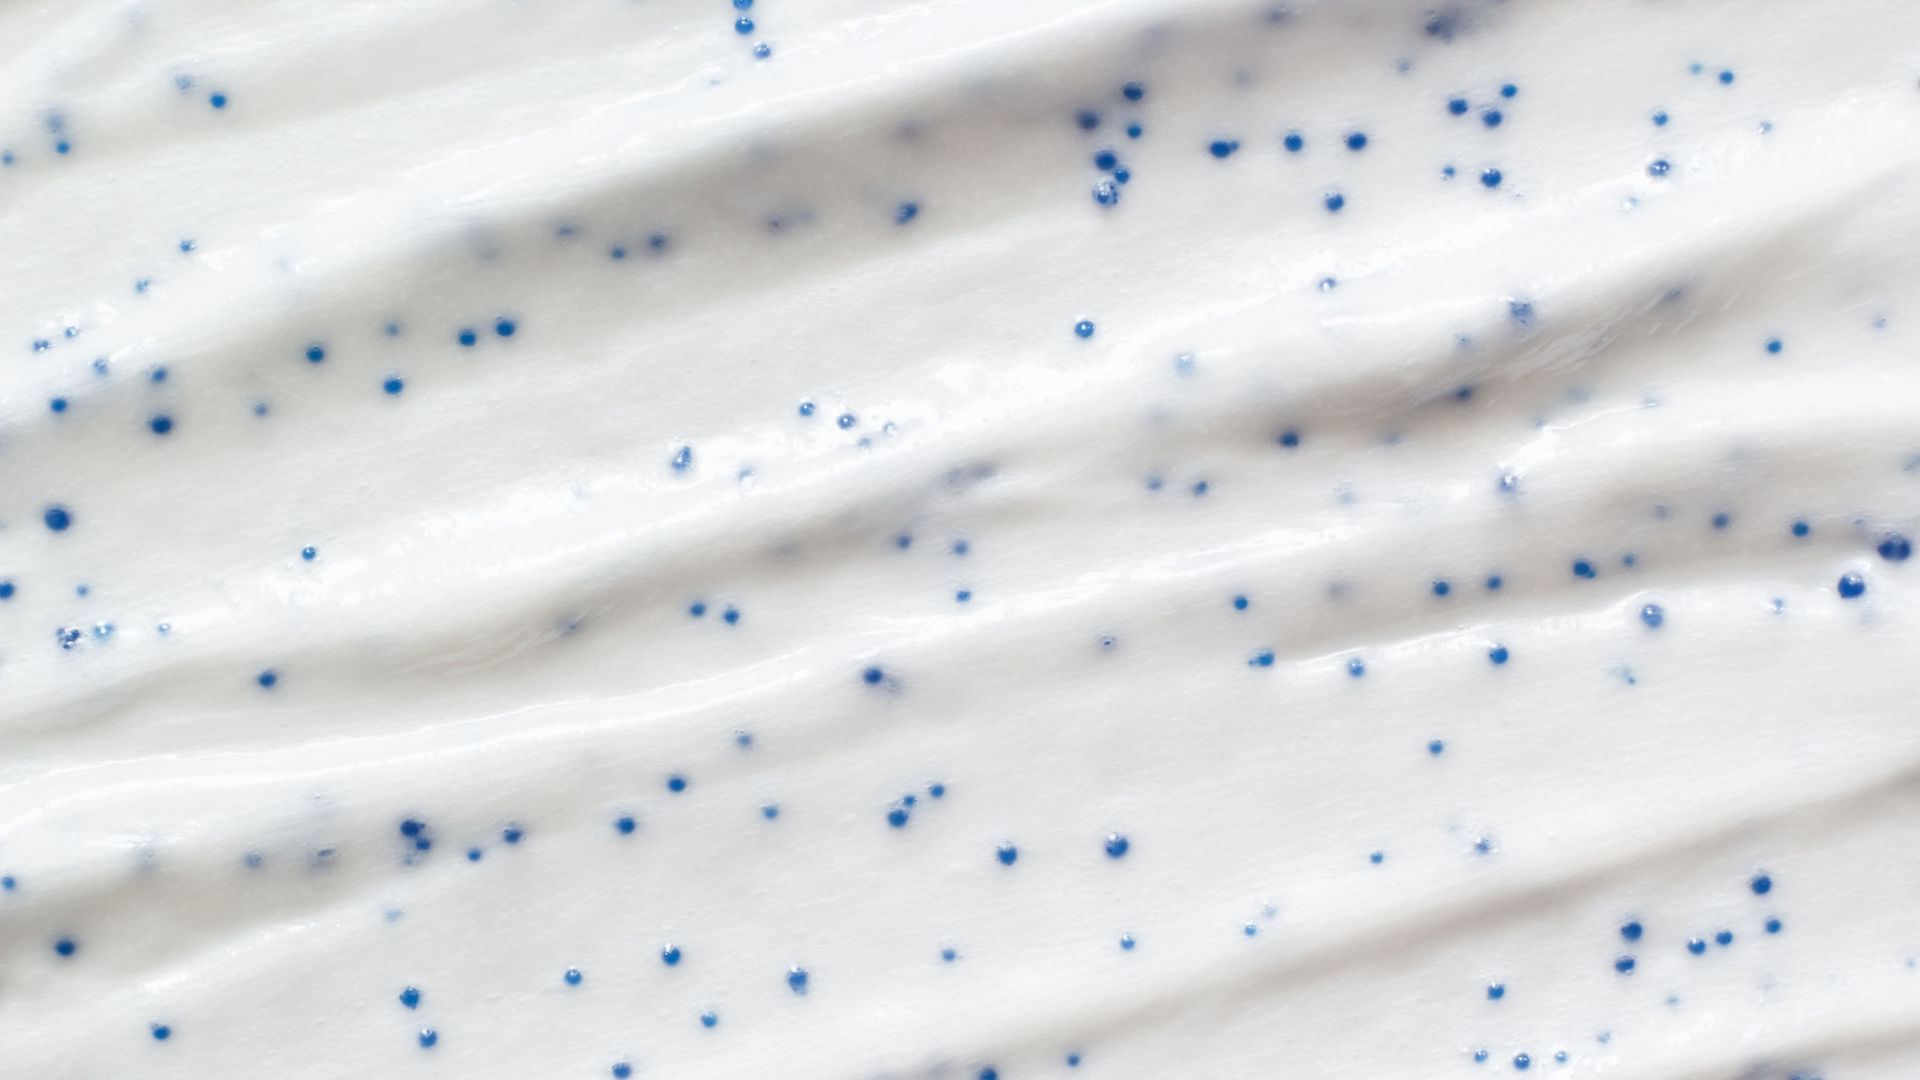 Plastic microbeads in rinseable personal care and cleaning products